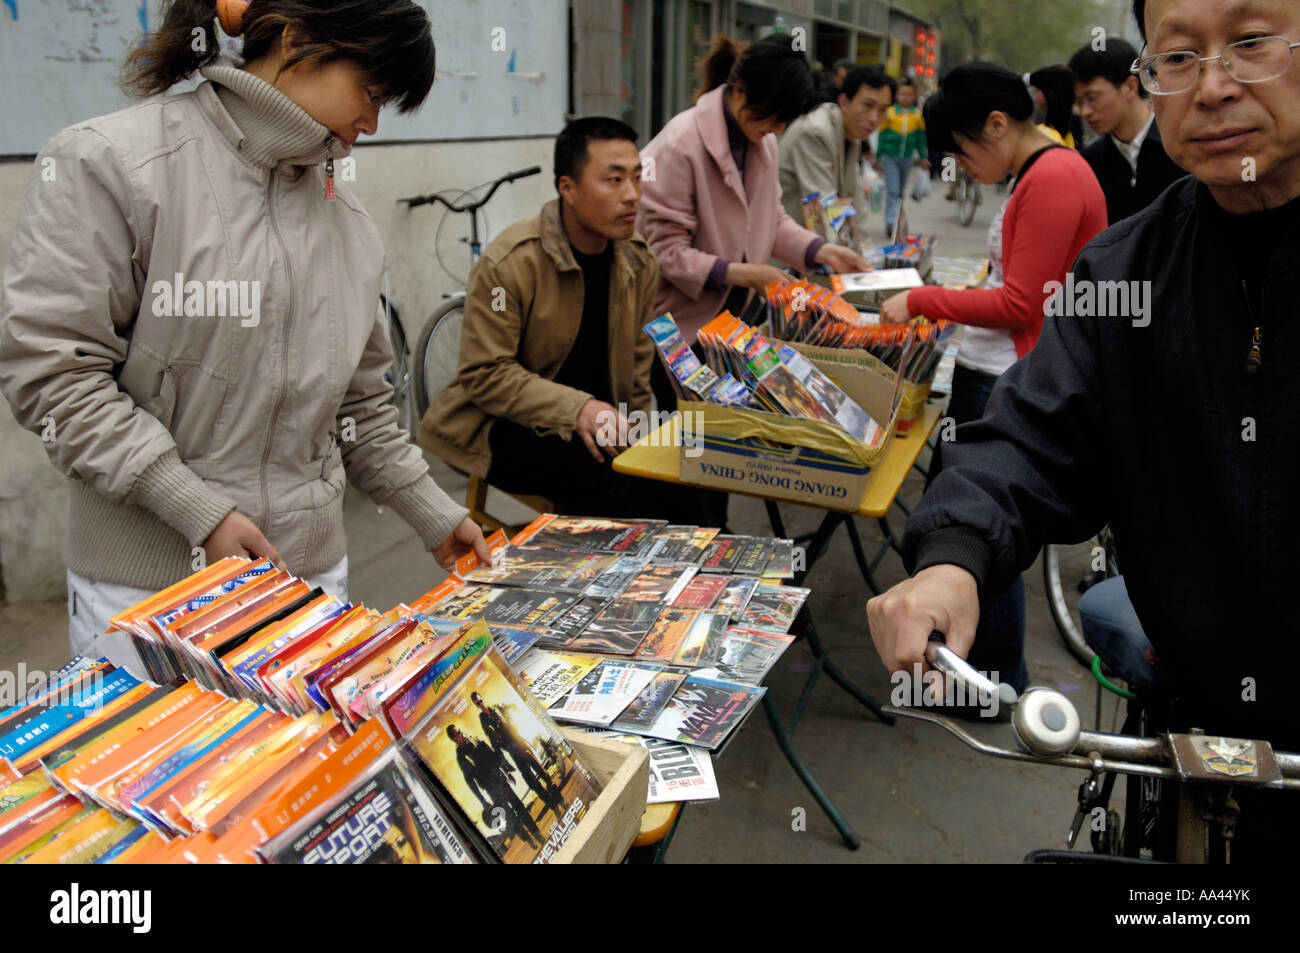 Pirated DVDs are sold openly in a community in Beijing China April 21 2006 Stock Photo